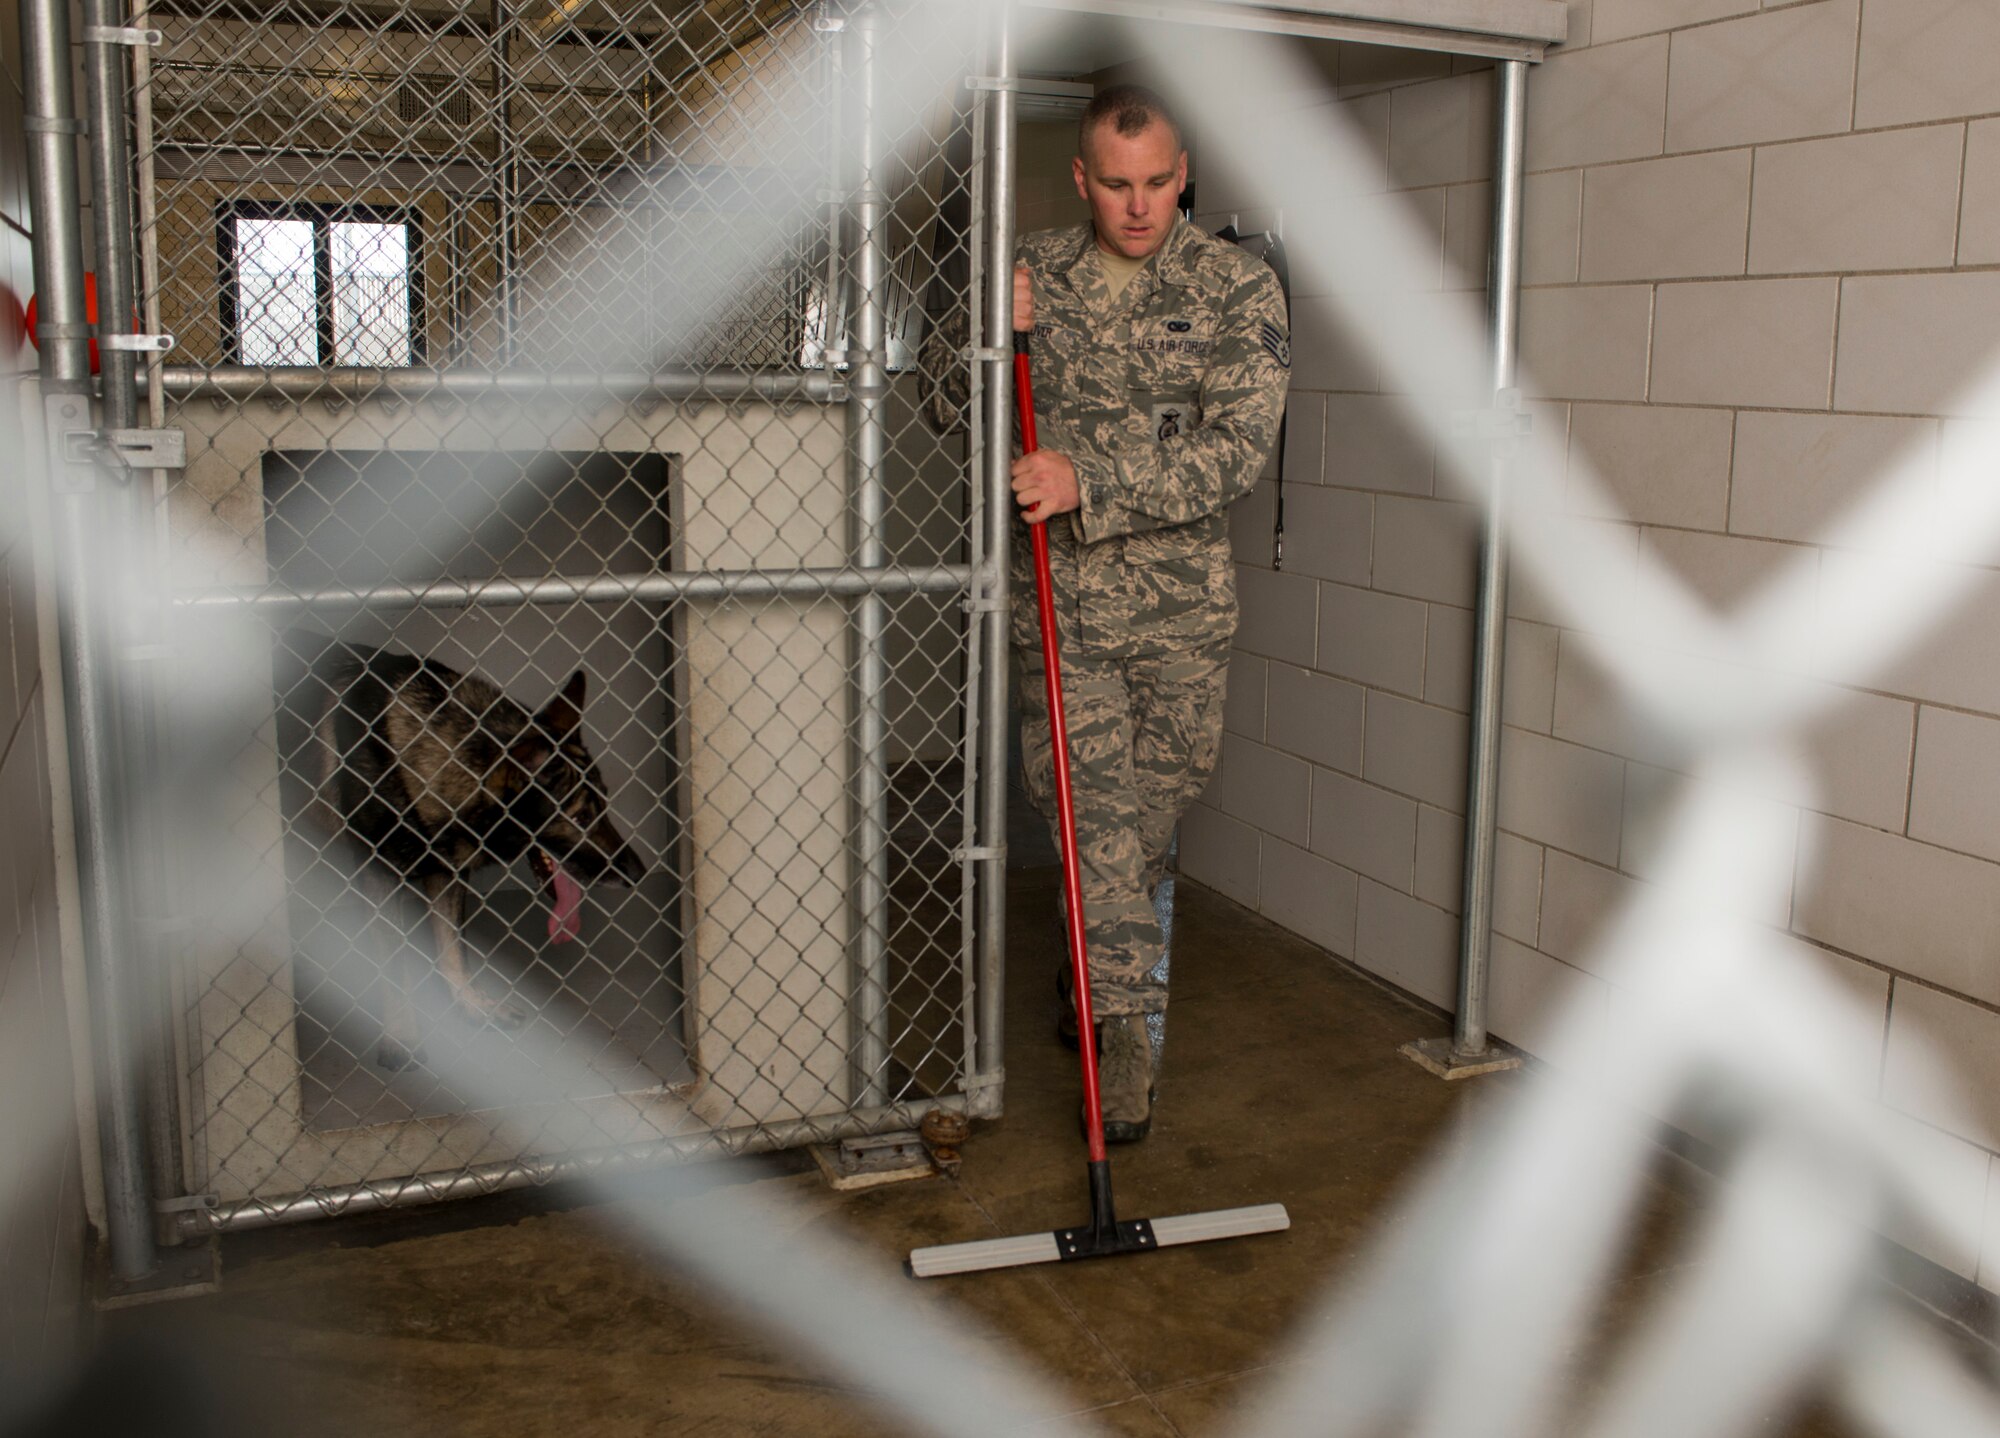 Staff Sgt. Tim Glover, 5th Security Forces Squadron military working dog handler, cleans the kennel of his MWD Roko on Minot Air Force Base, N.D., July 28, 2014. After watching MWD handlers work at his last base, Glover decided  he wanted to specialize and applied to become one. (U.S. Air Force photo/Senior Airman Stephanie Morris)